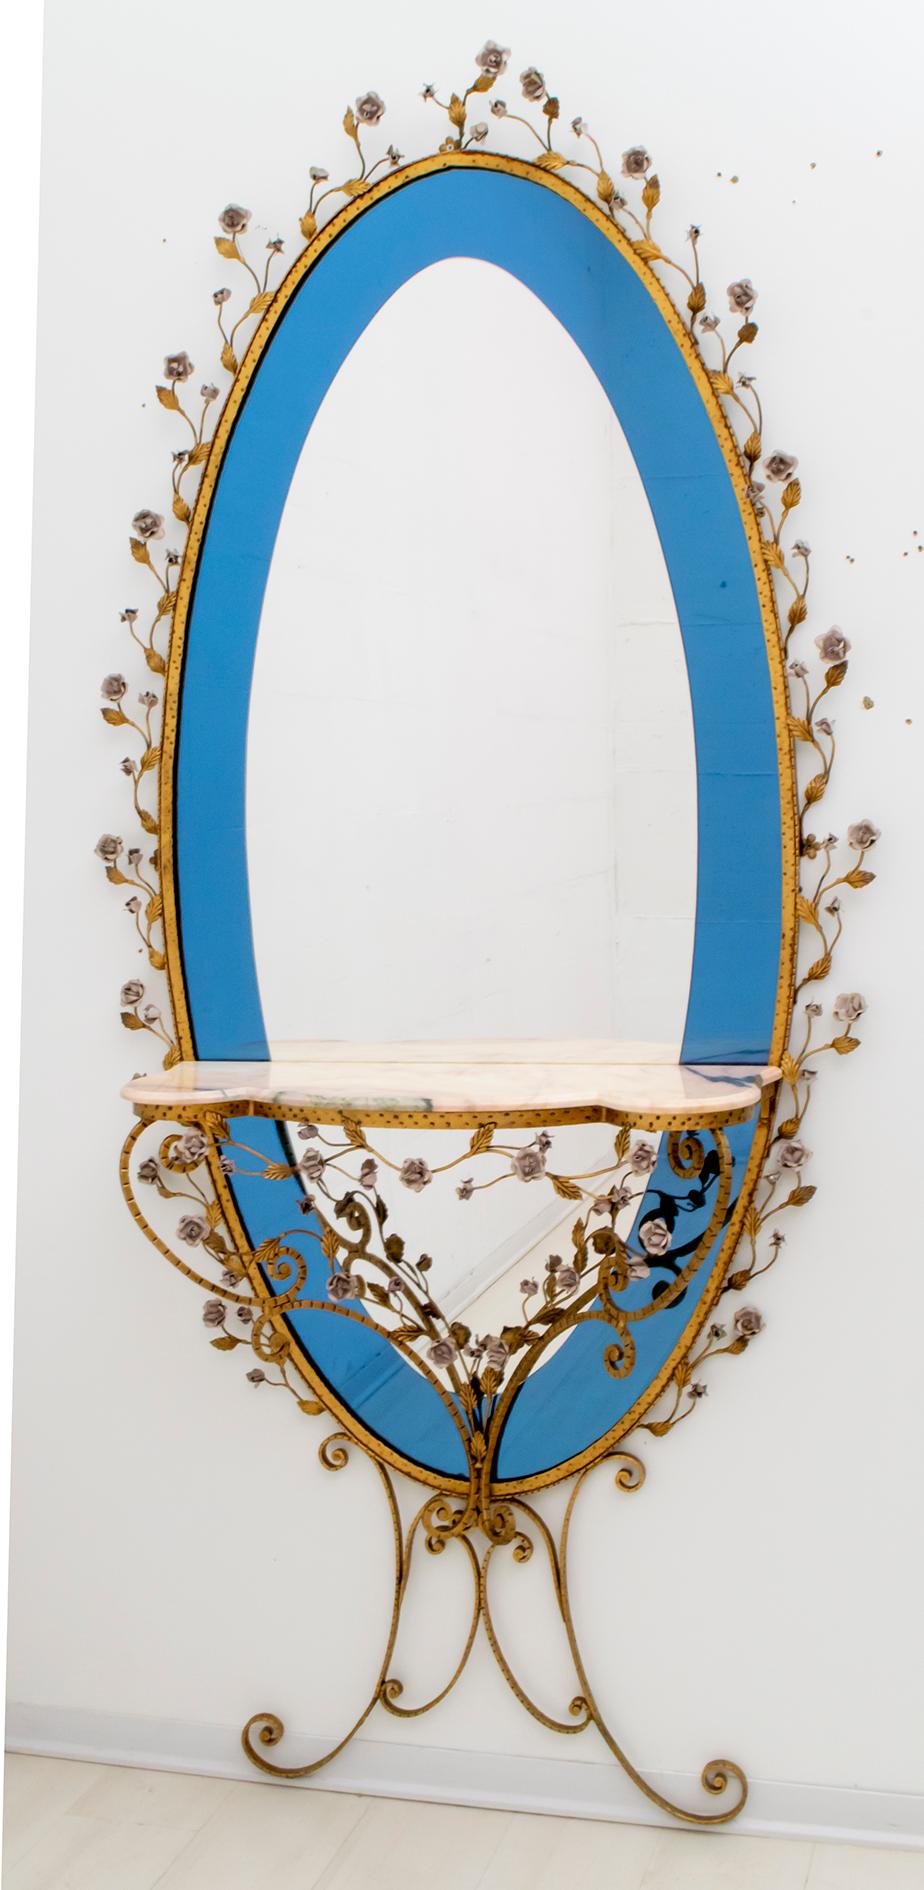 Beautiful entrance mirror with console, sophisticated, elegant, designed by Pier Luigi Colli, Italy, Turin 1950
The structure is in wrought iron, the handmade flowers in wrought iron, the mirror is in two colors, cobalt blue and transparent, the